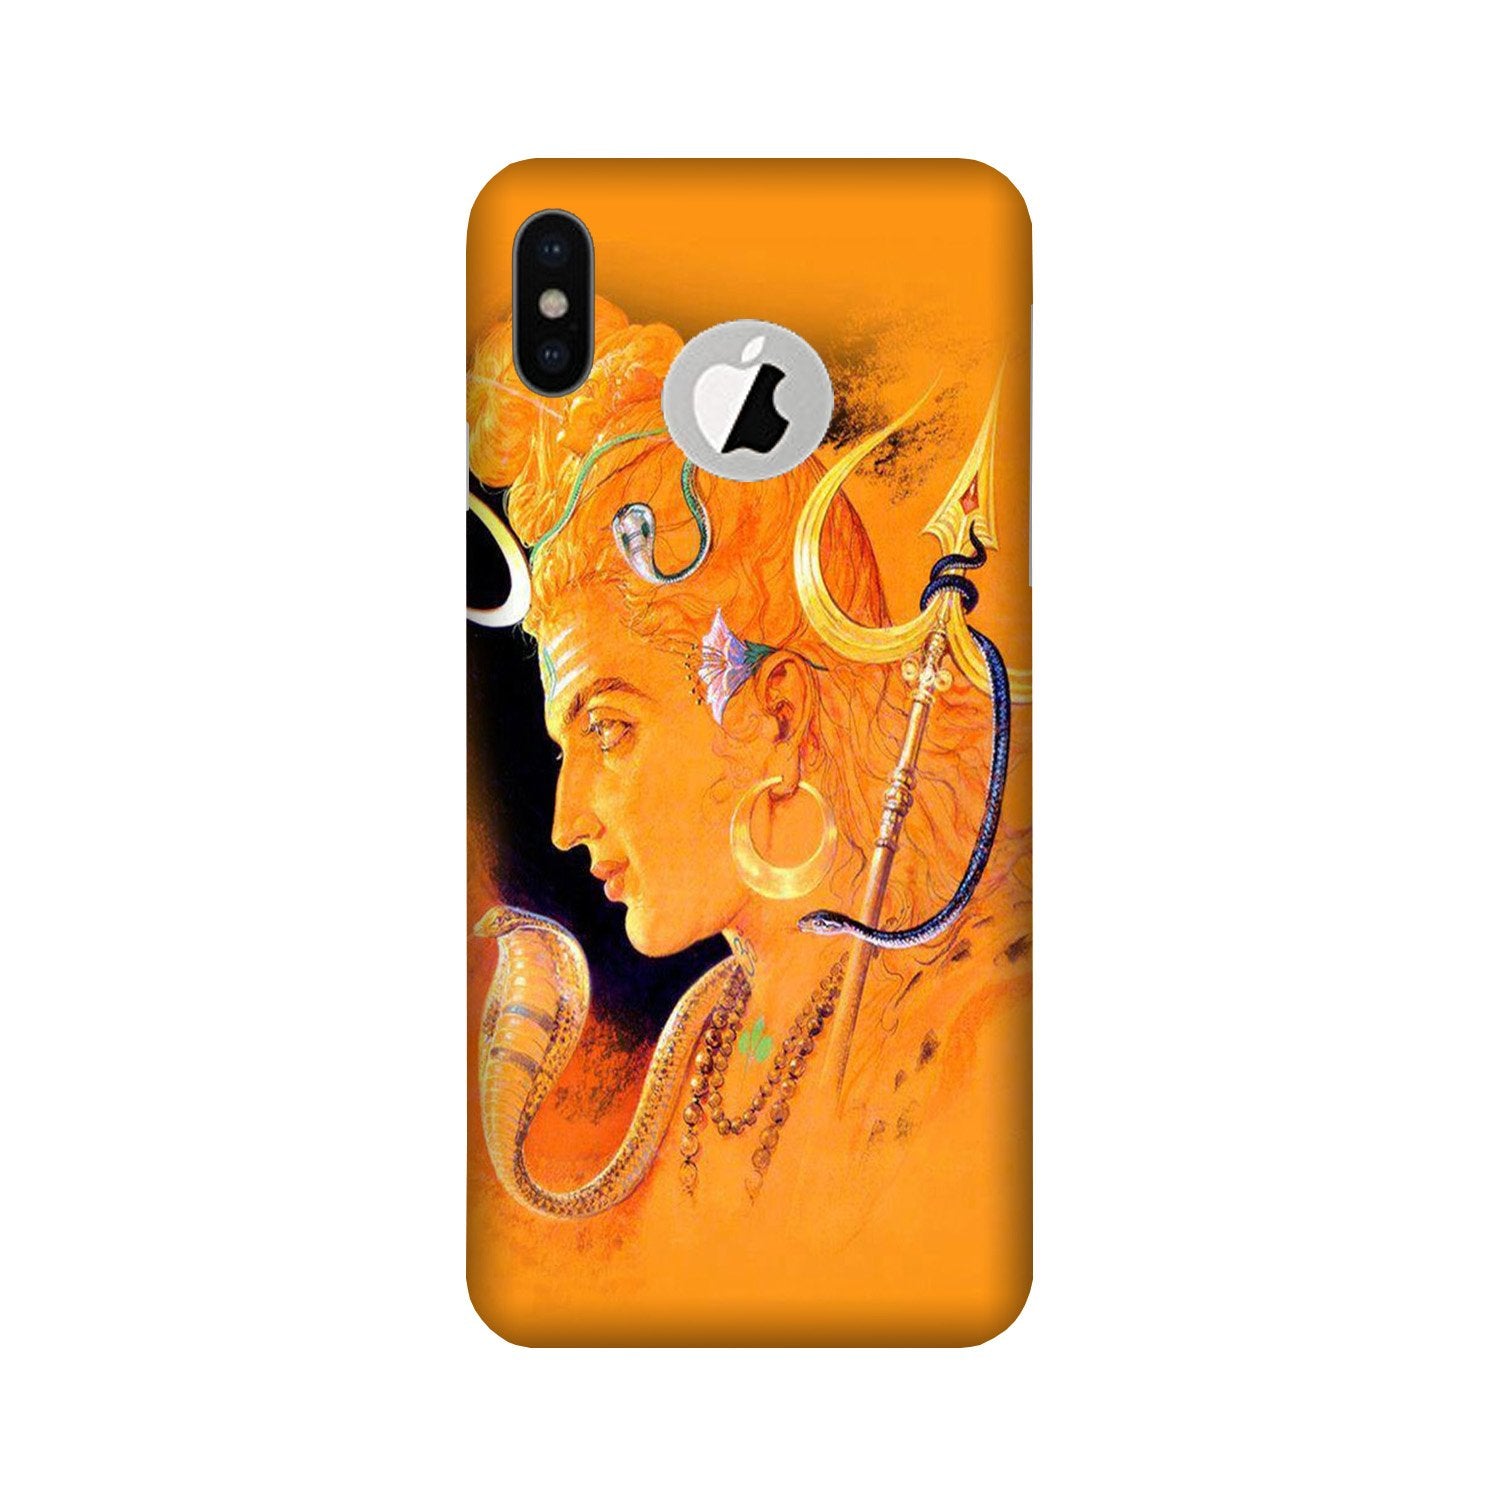 Lord Shiva Case for iPhone Xs logo cut(Design No. 293)